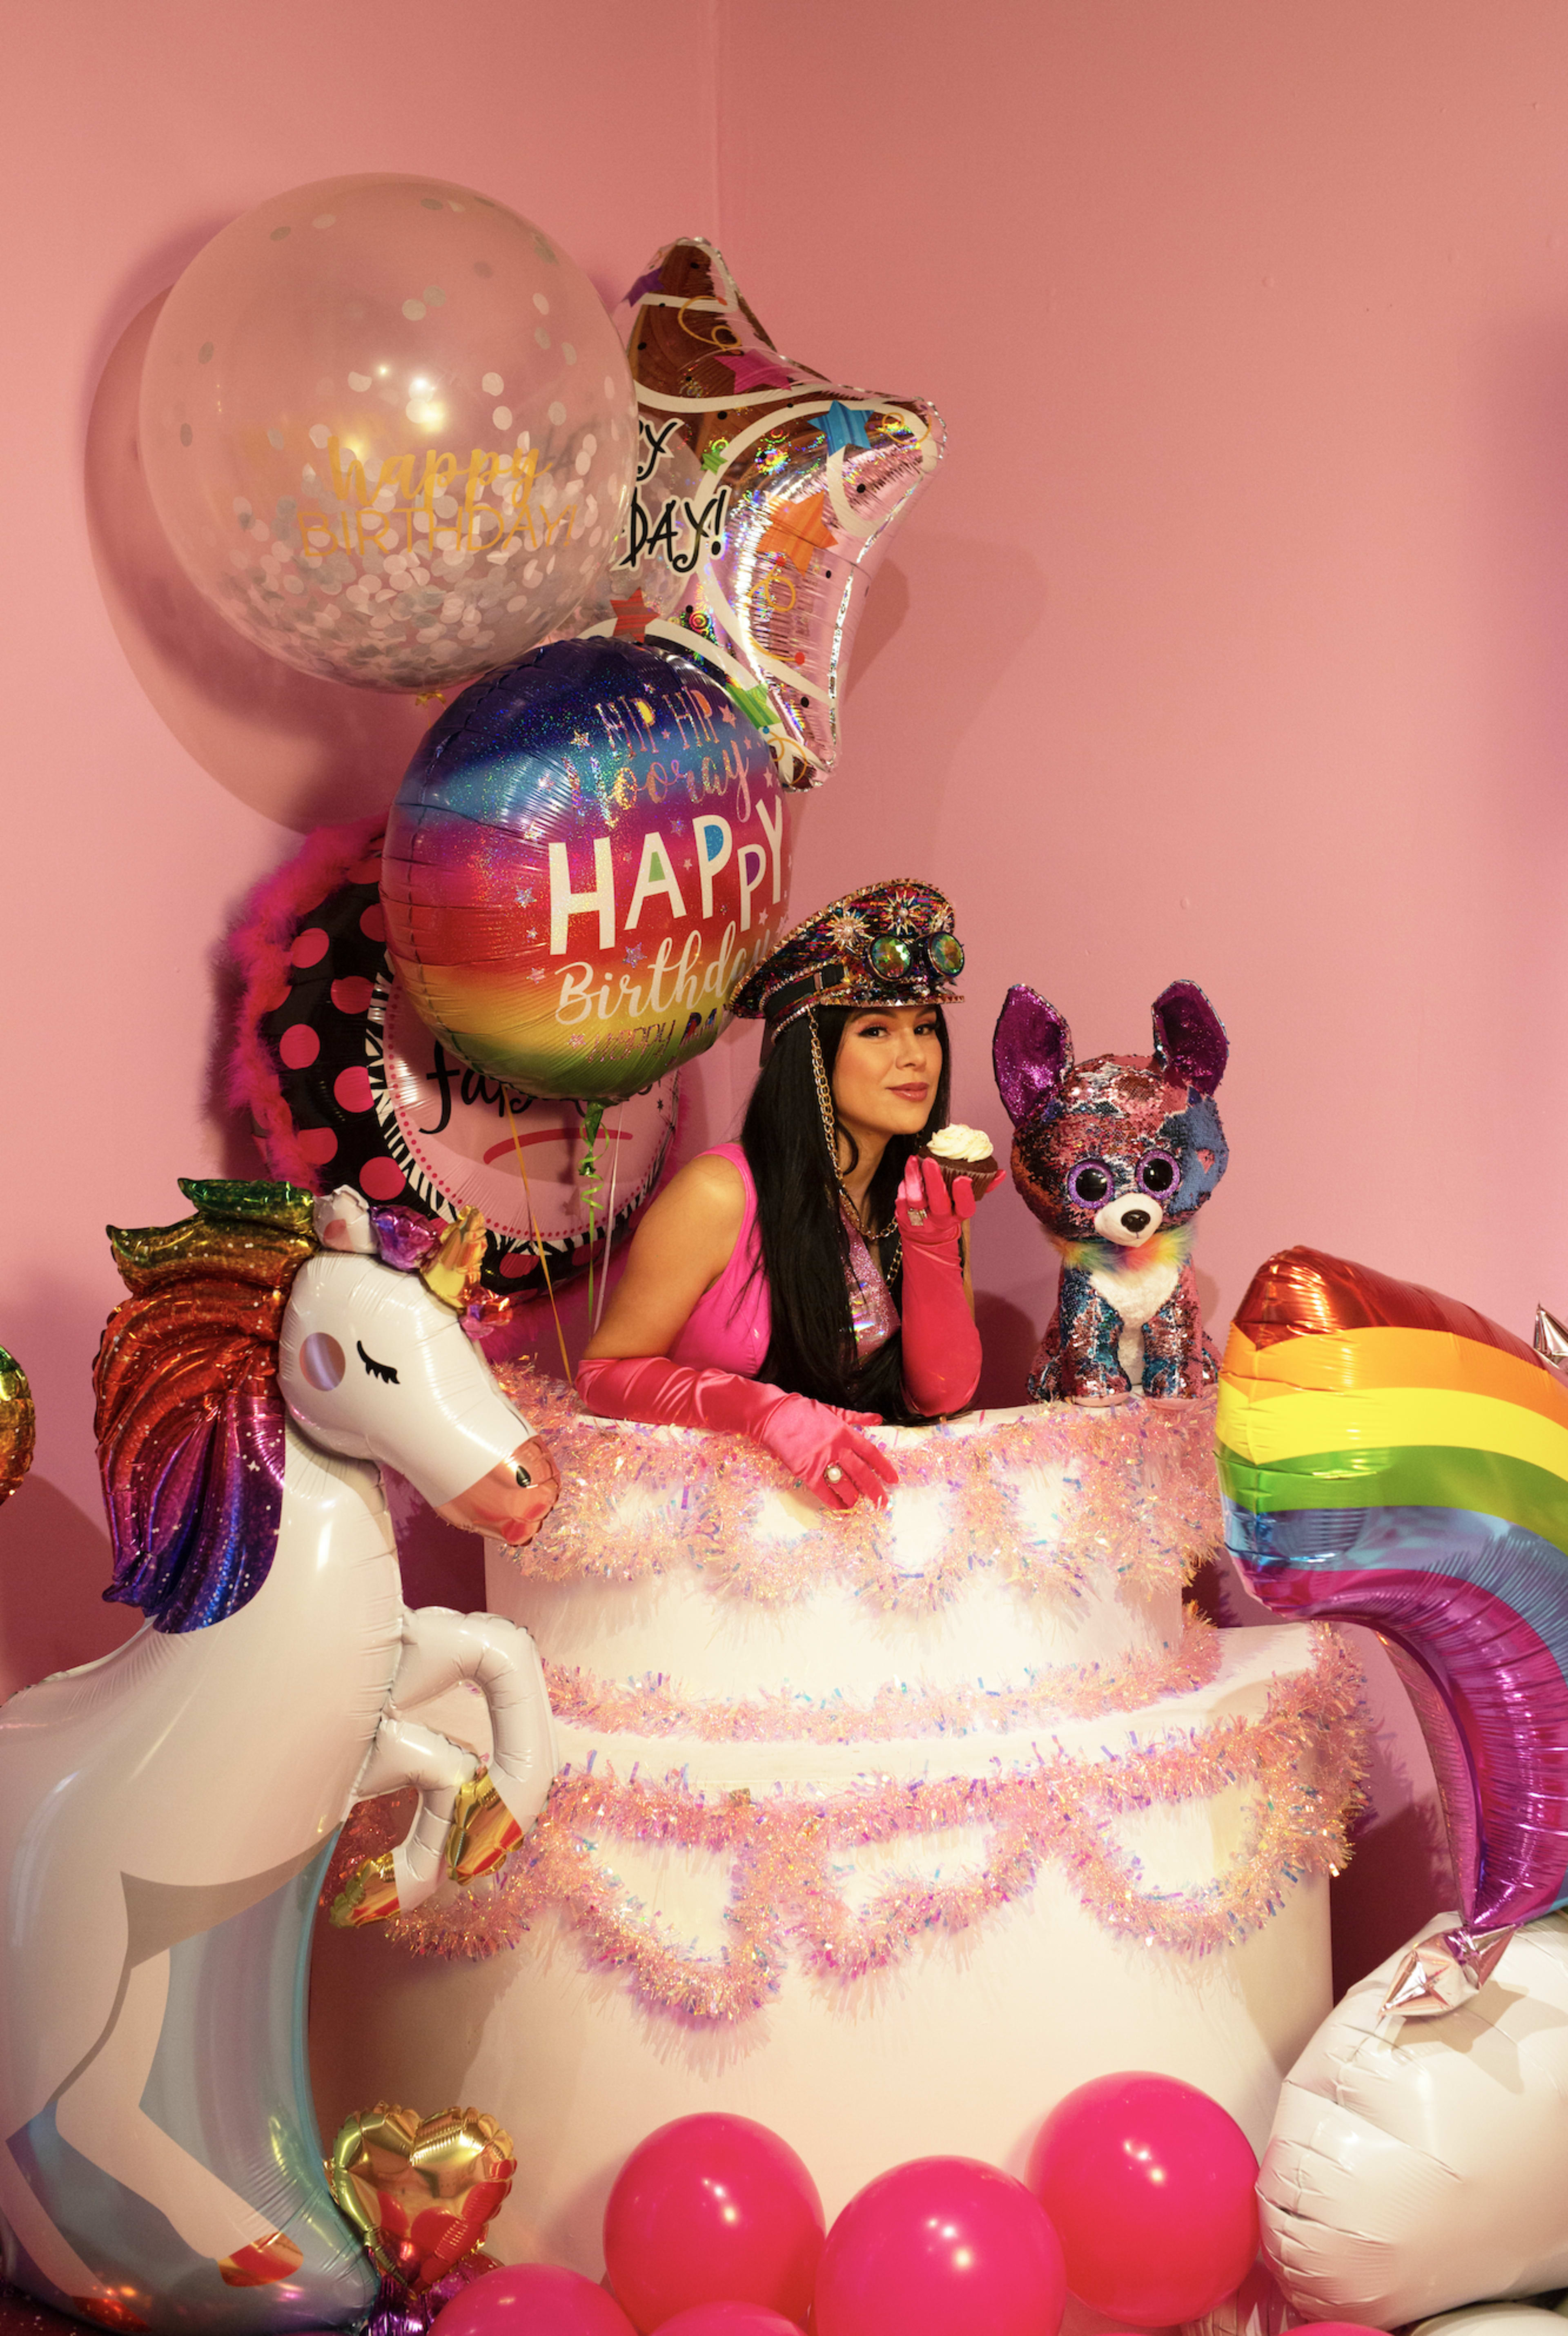 A unicorn-themed birthday photoshoot with a woman sitting on top of a cake surrounded by balloons.